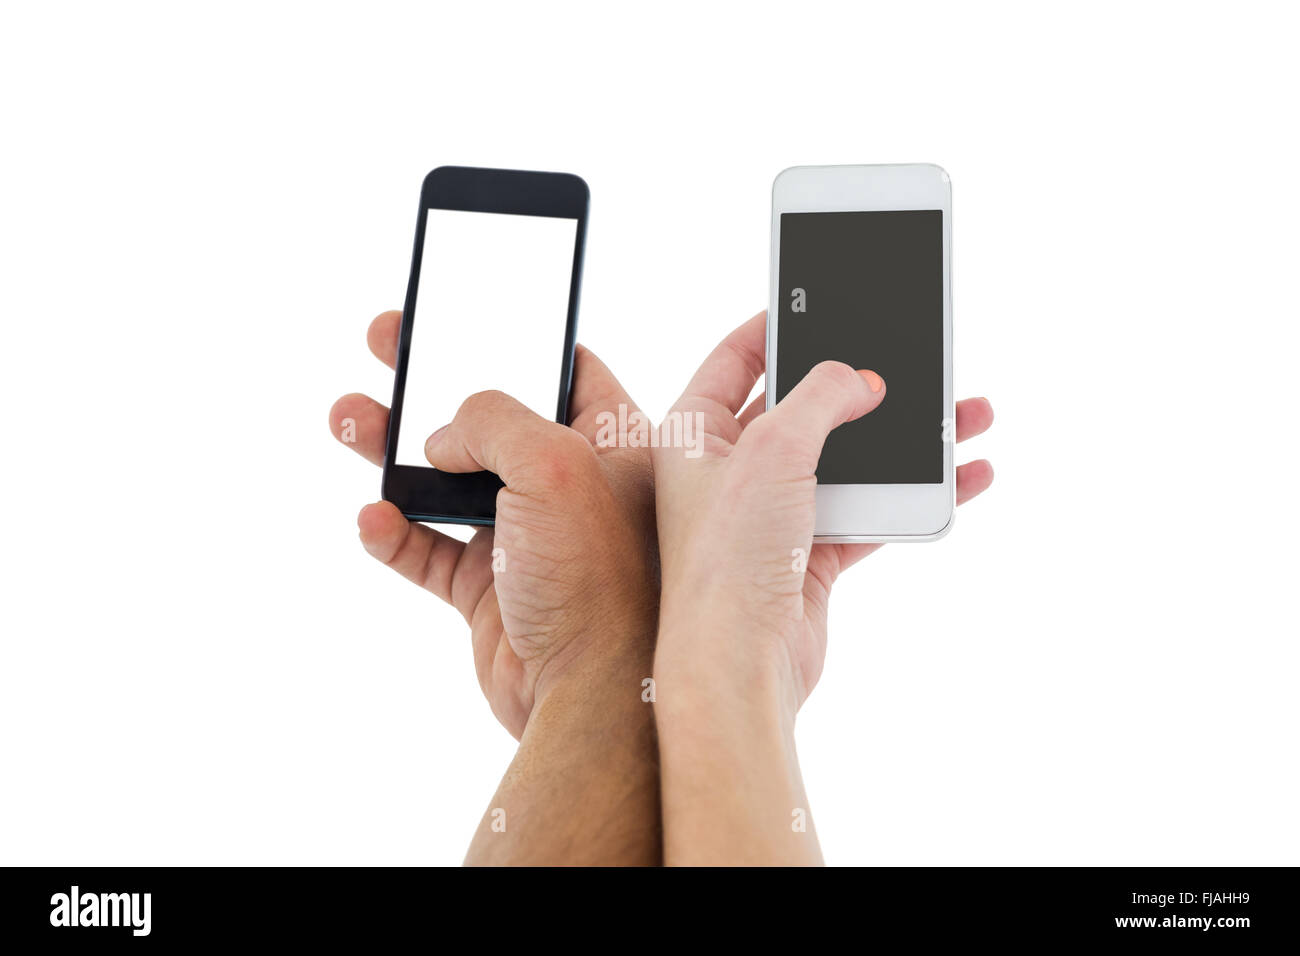 Hands of a couple holding smartphones Stock Photo